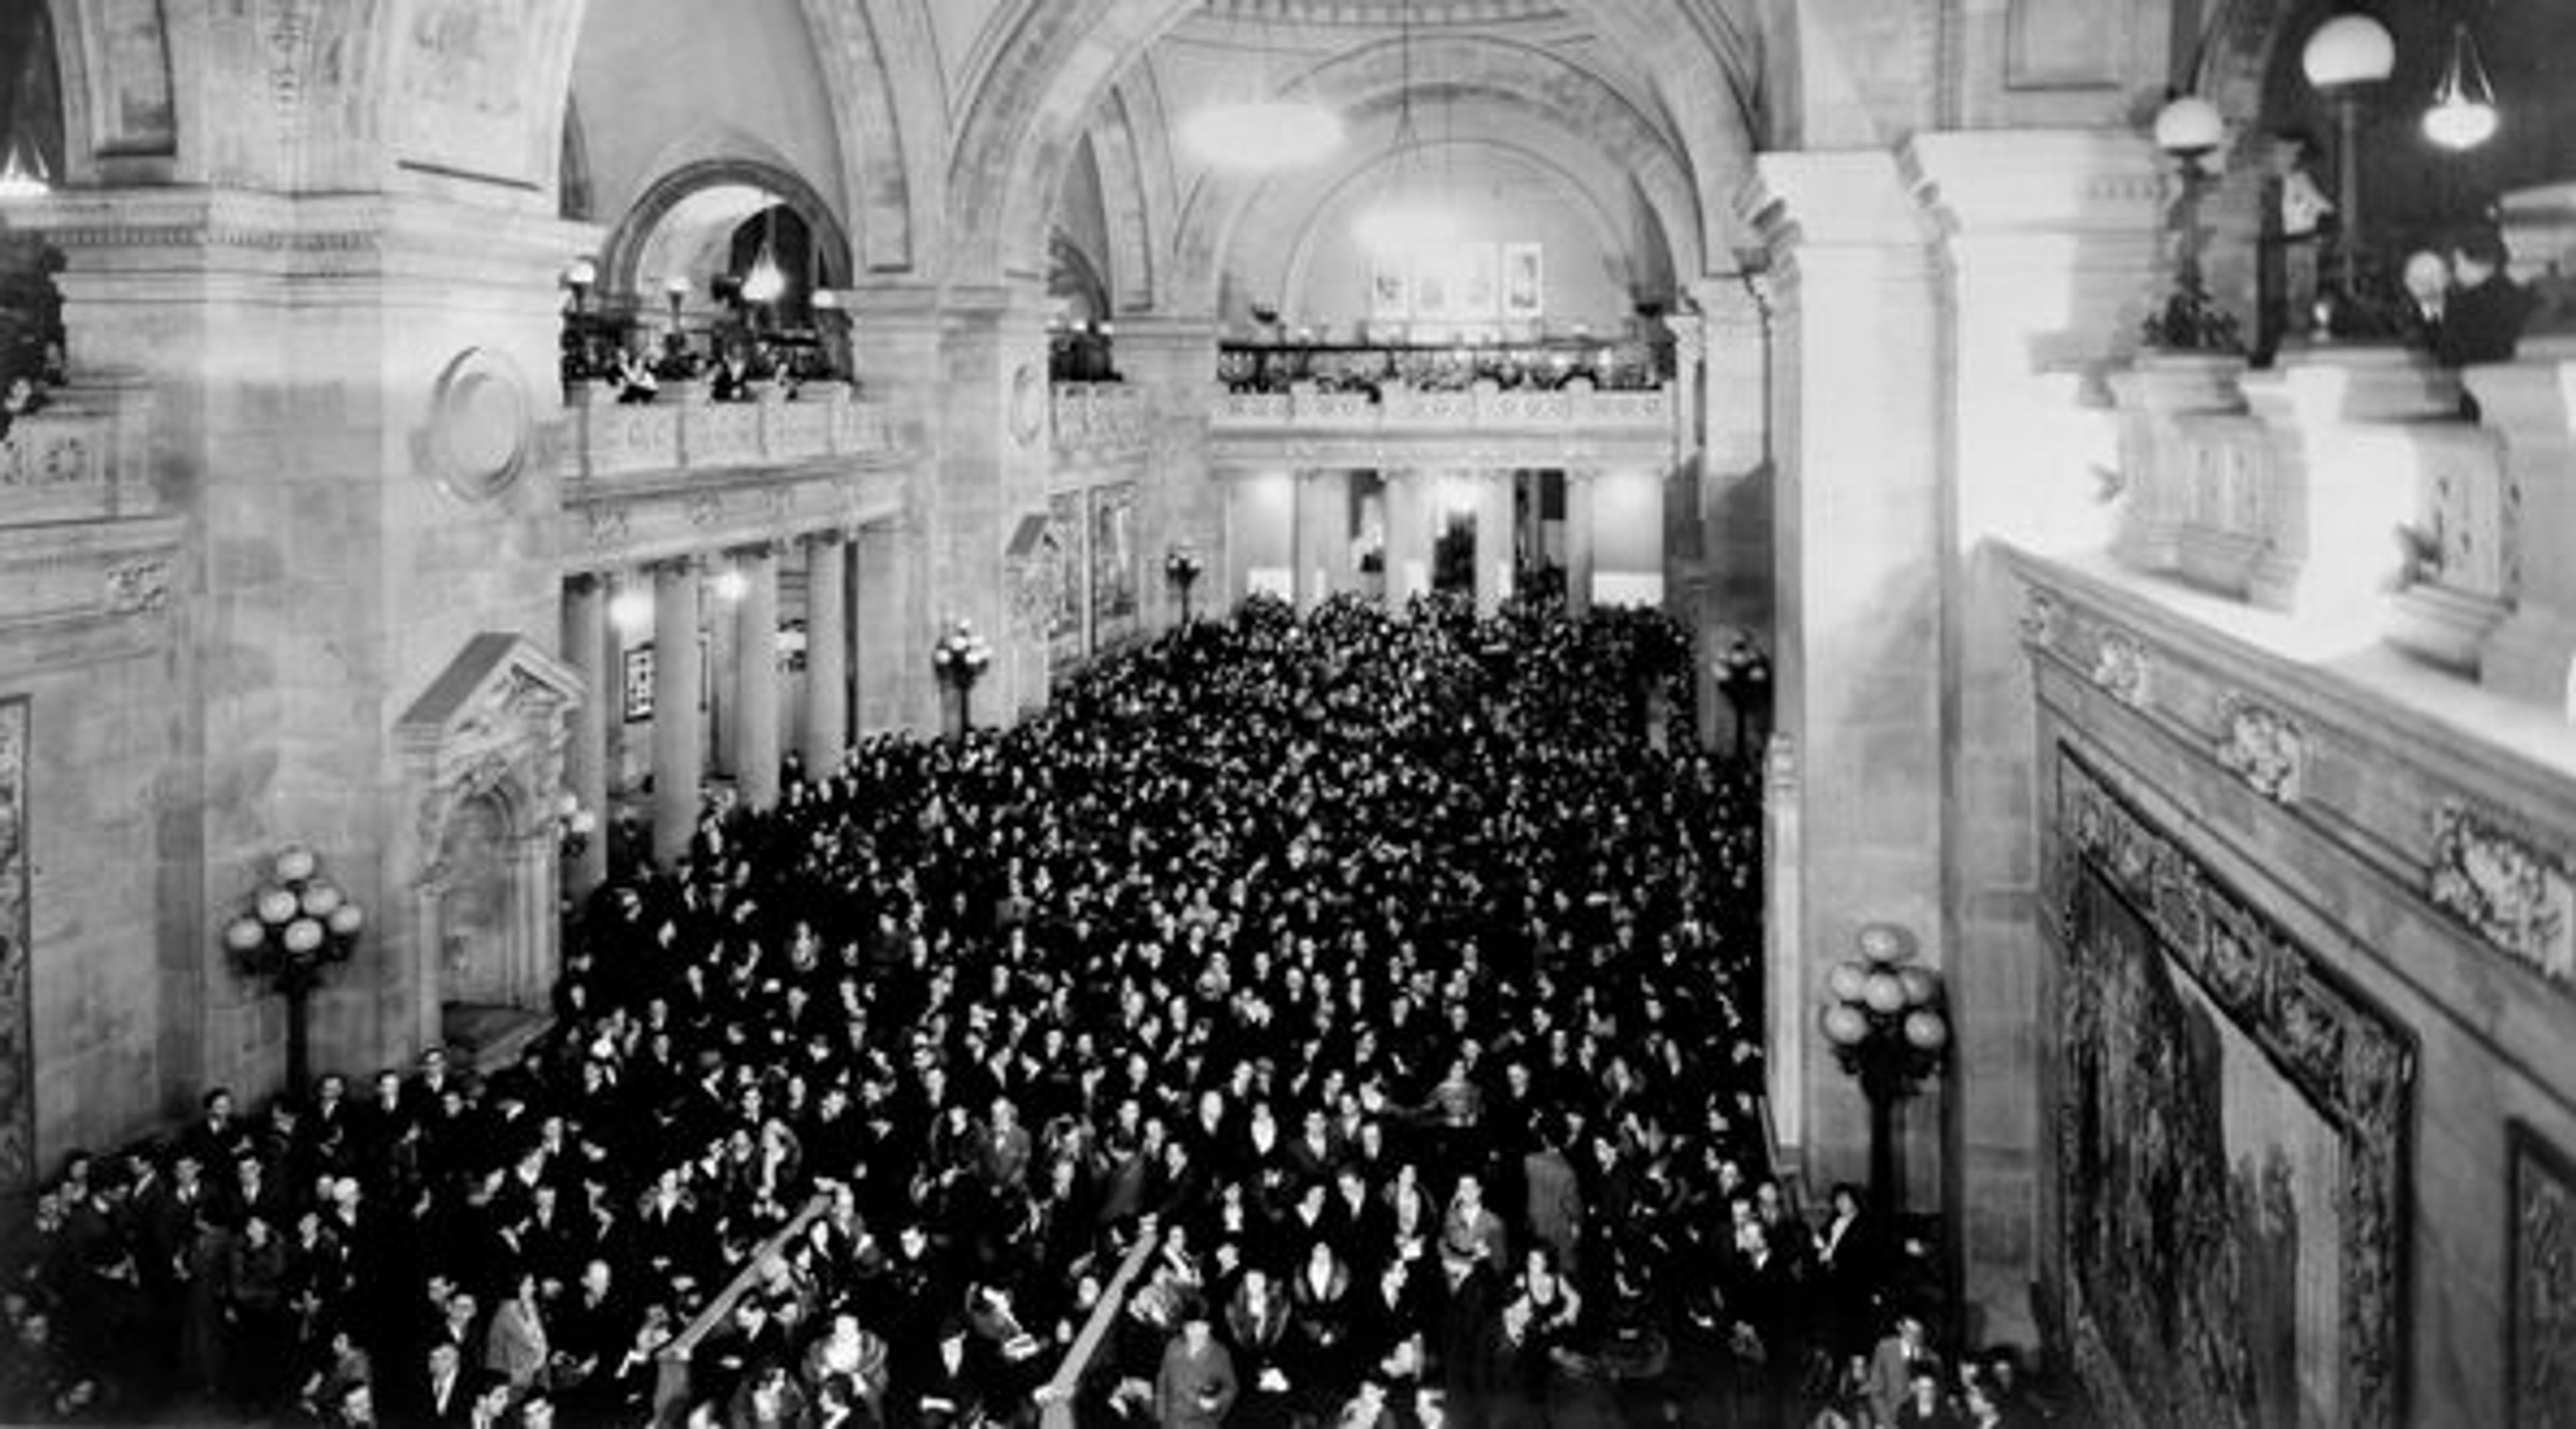 Audience in the Great Hall for Mannes concert, February 1, 1933